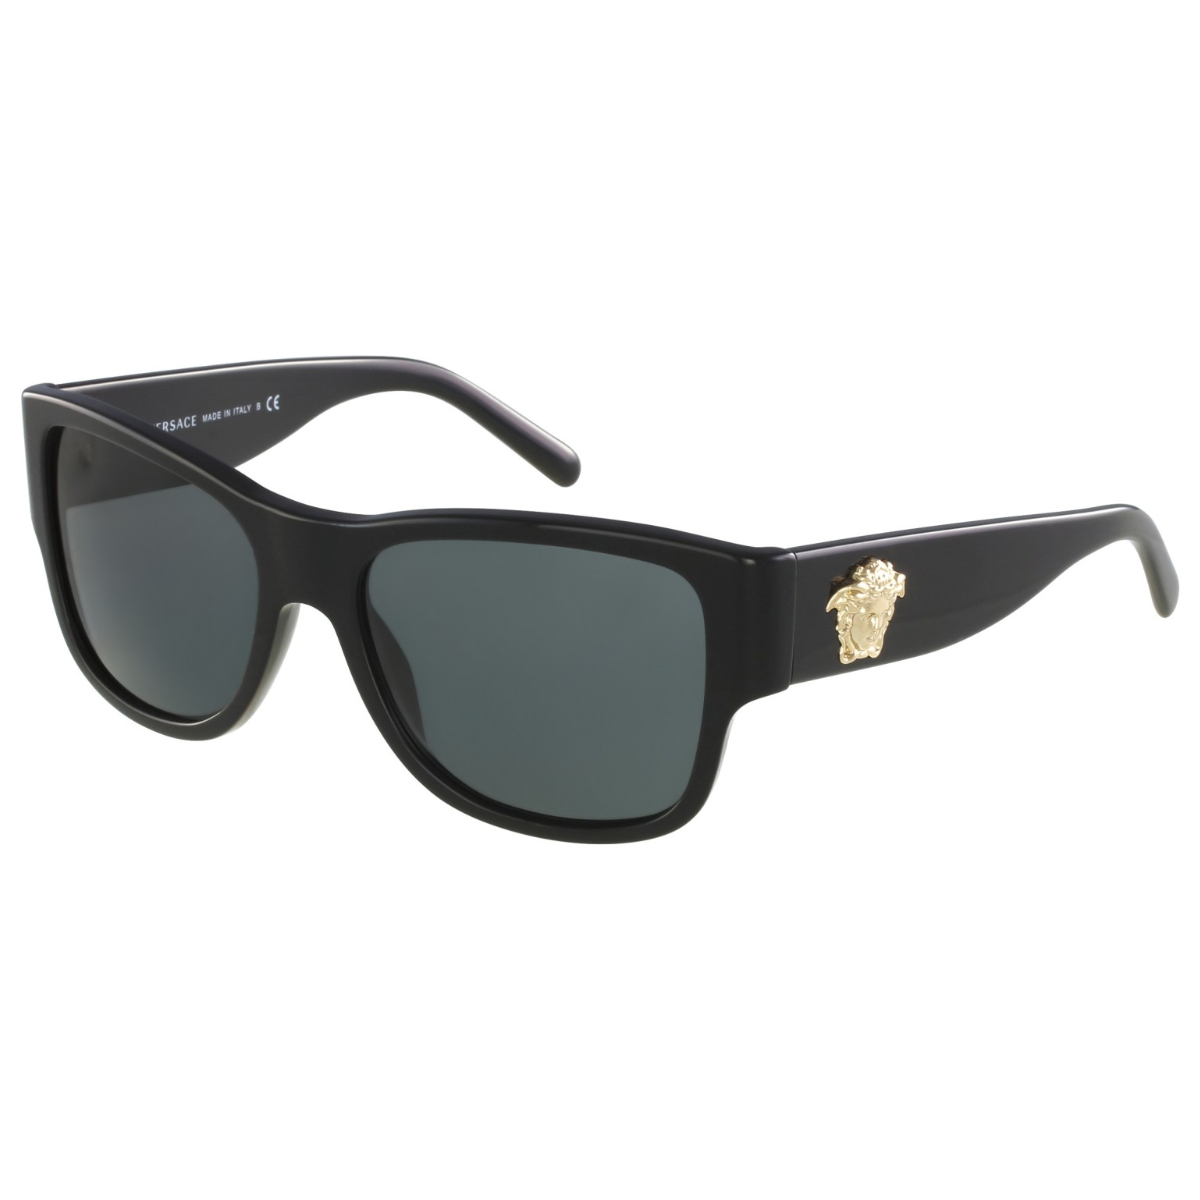 "Discover the chic Versace 2242 100287 Sunglasses at Optorium. Unisex brown gradient lens with black and gold temples. Elevate your style today! optorium"